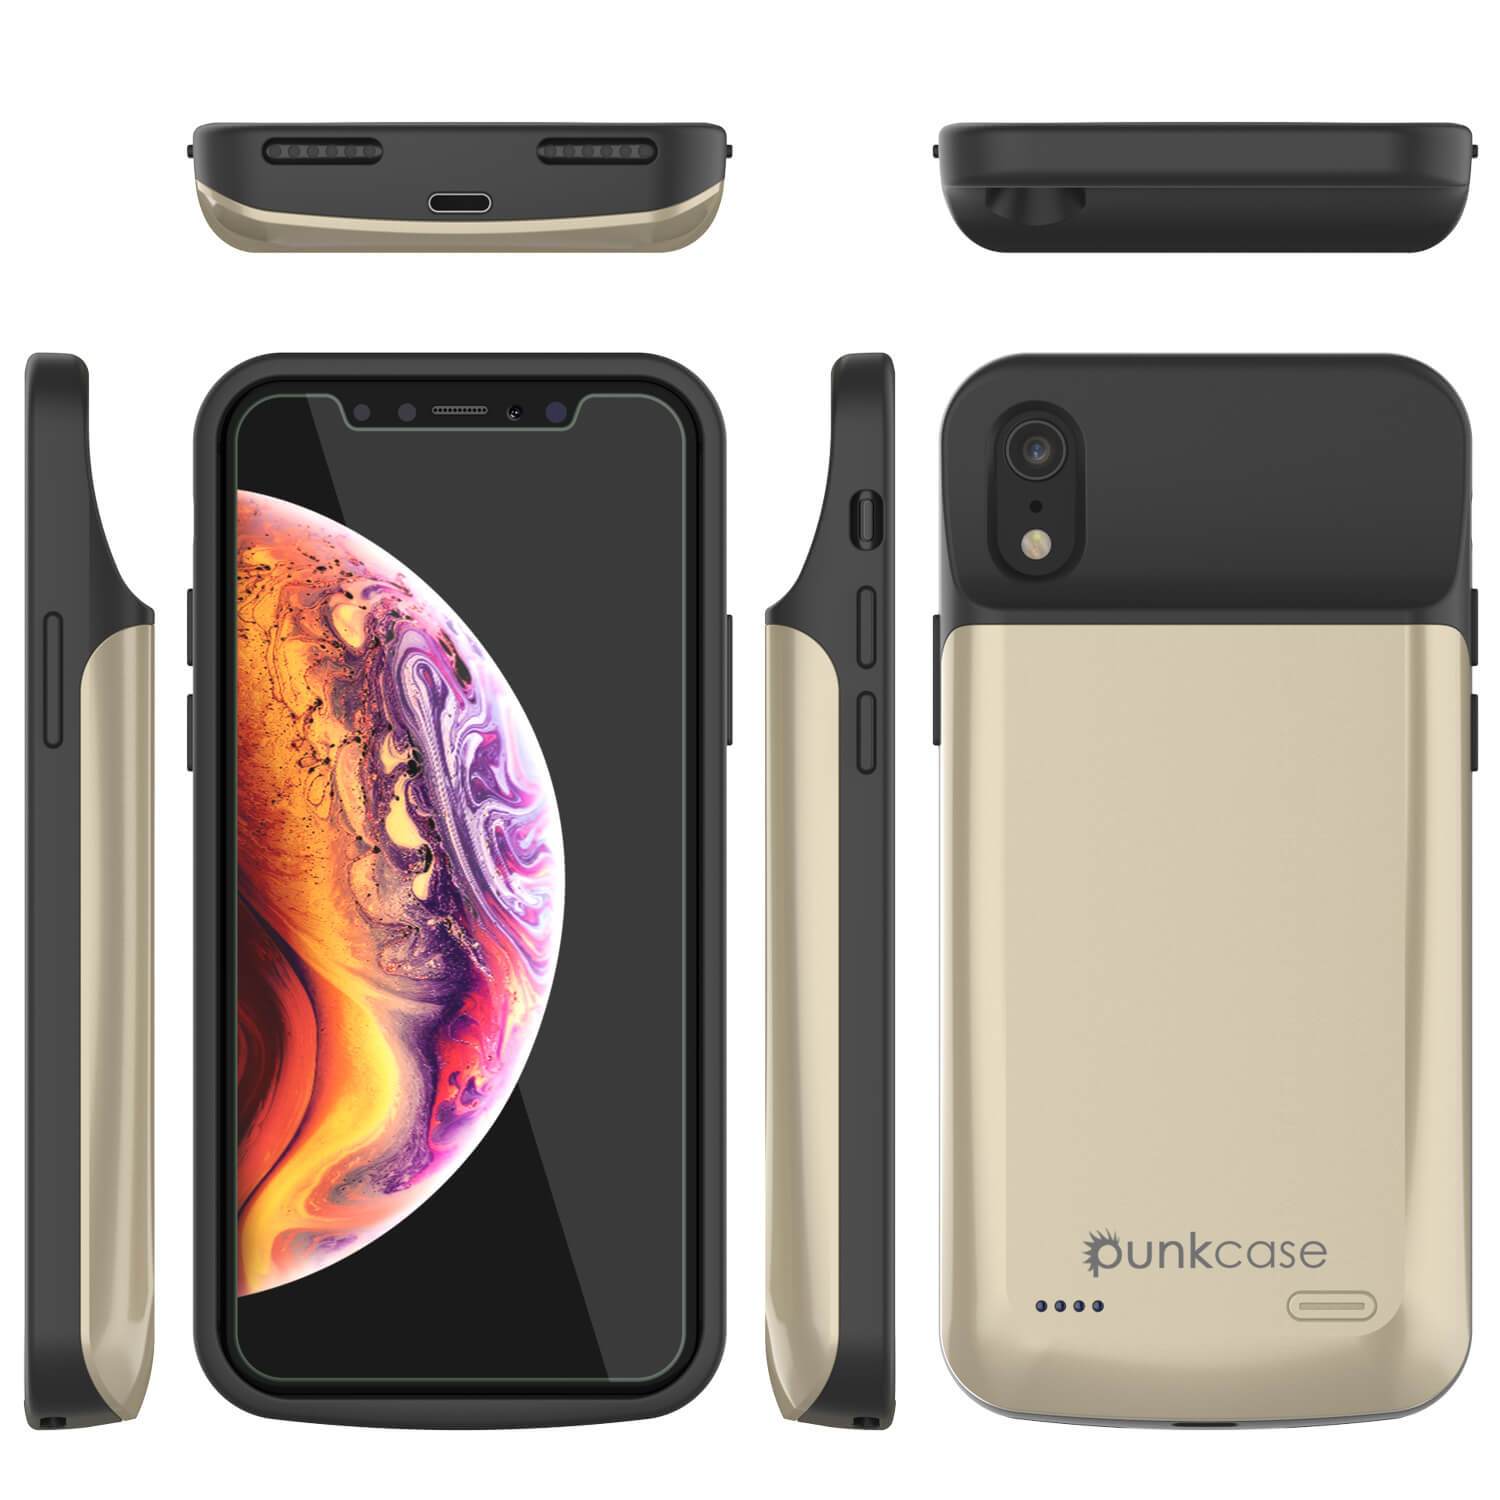 iphone XR Battery Case, PunkJuice 5000mAH Fast Charging Power Bank W/ Screen Protector | [Gold]